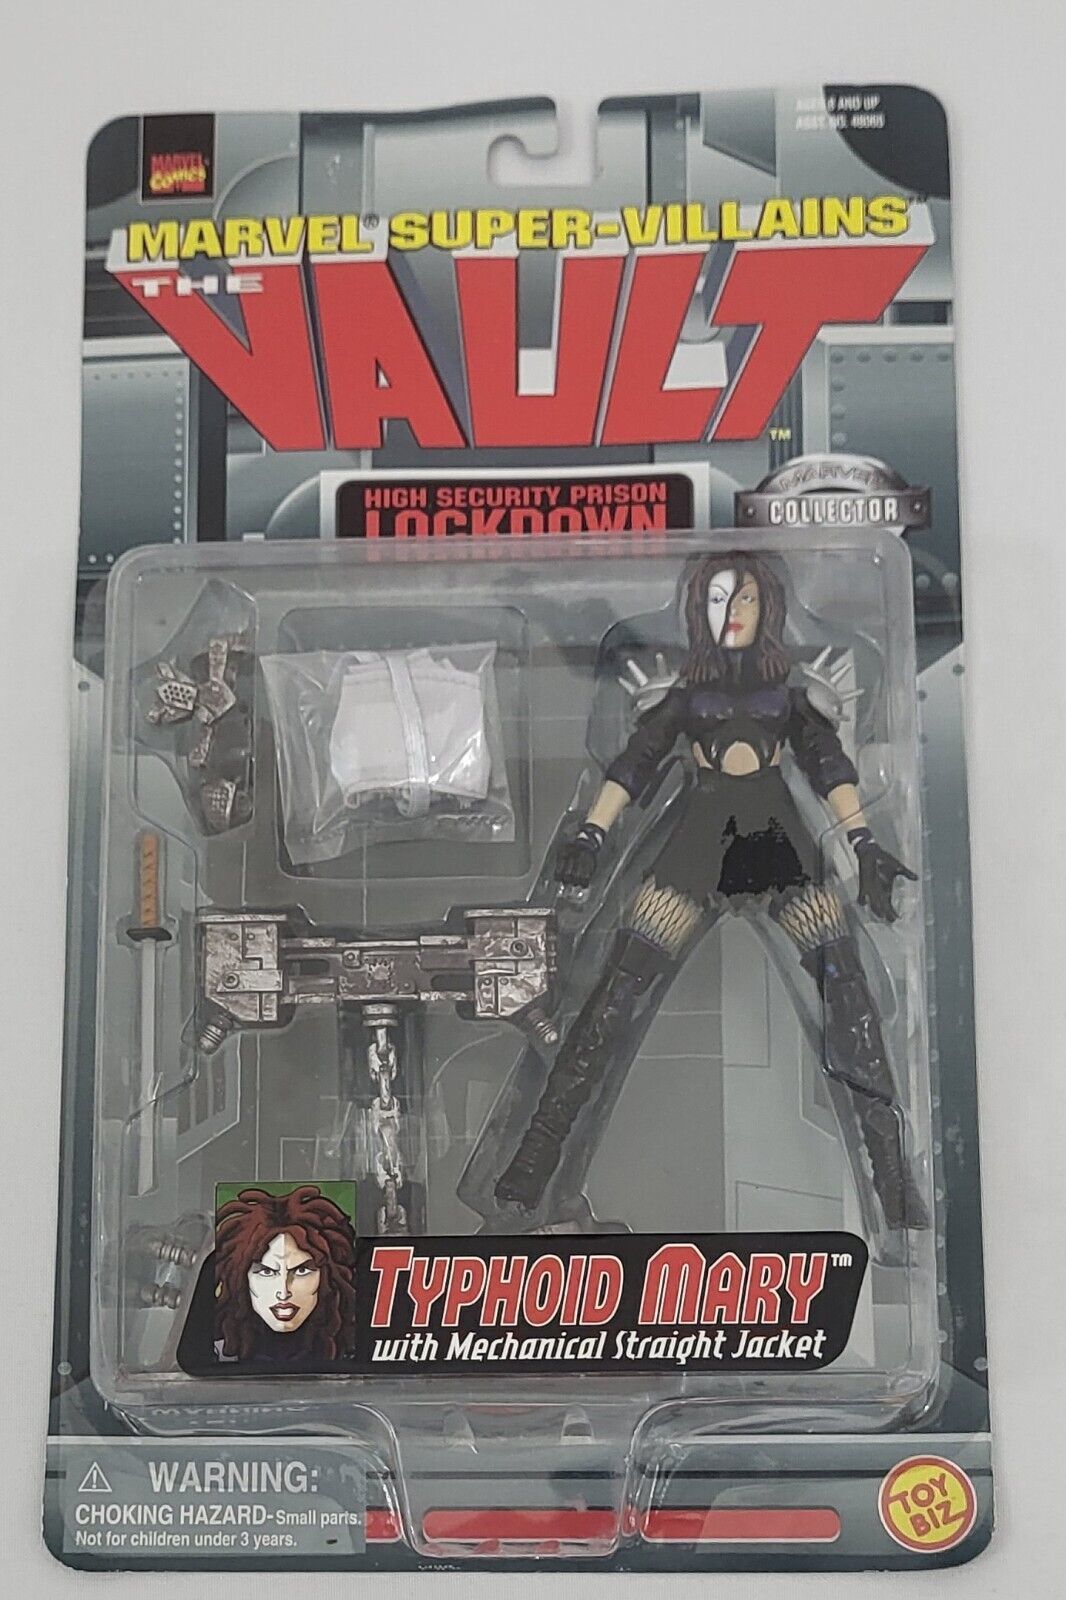 Marvel Super Villains The Vault Typhoid Mary with Mechanical Straight Jacket - $20.73